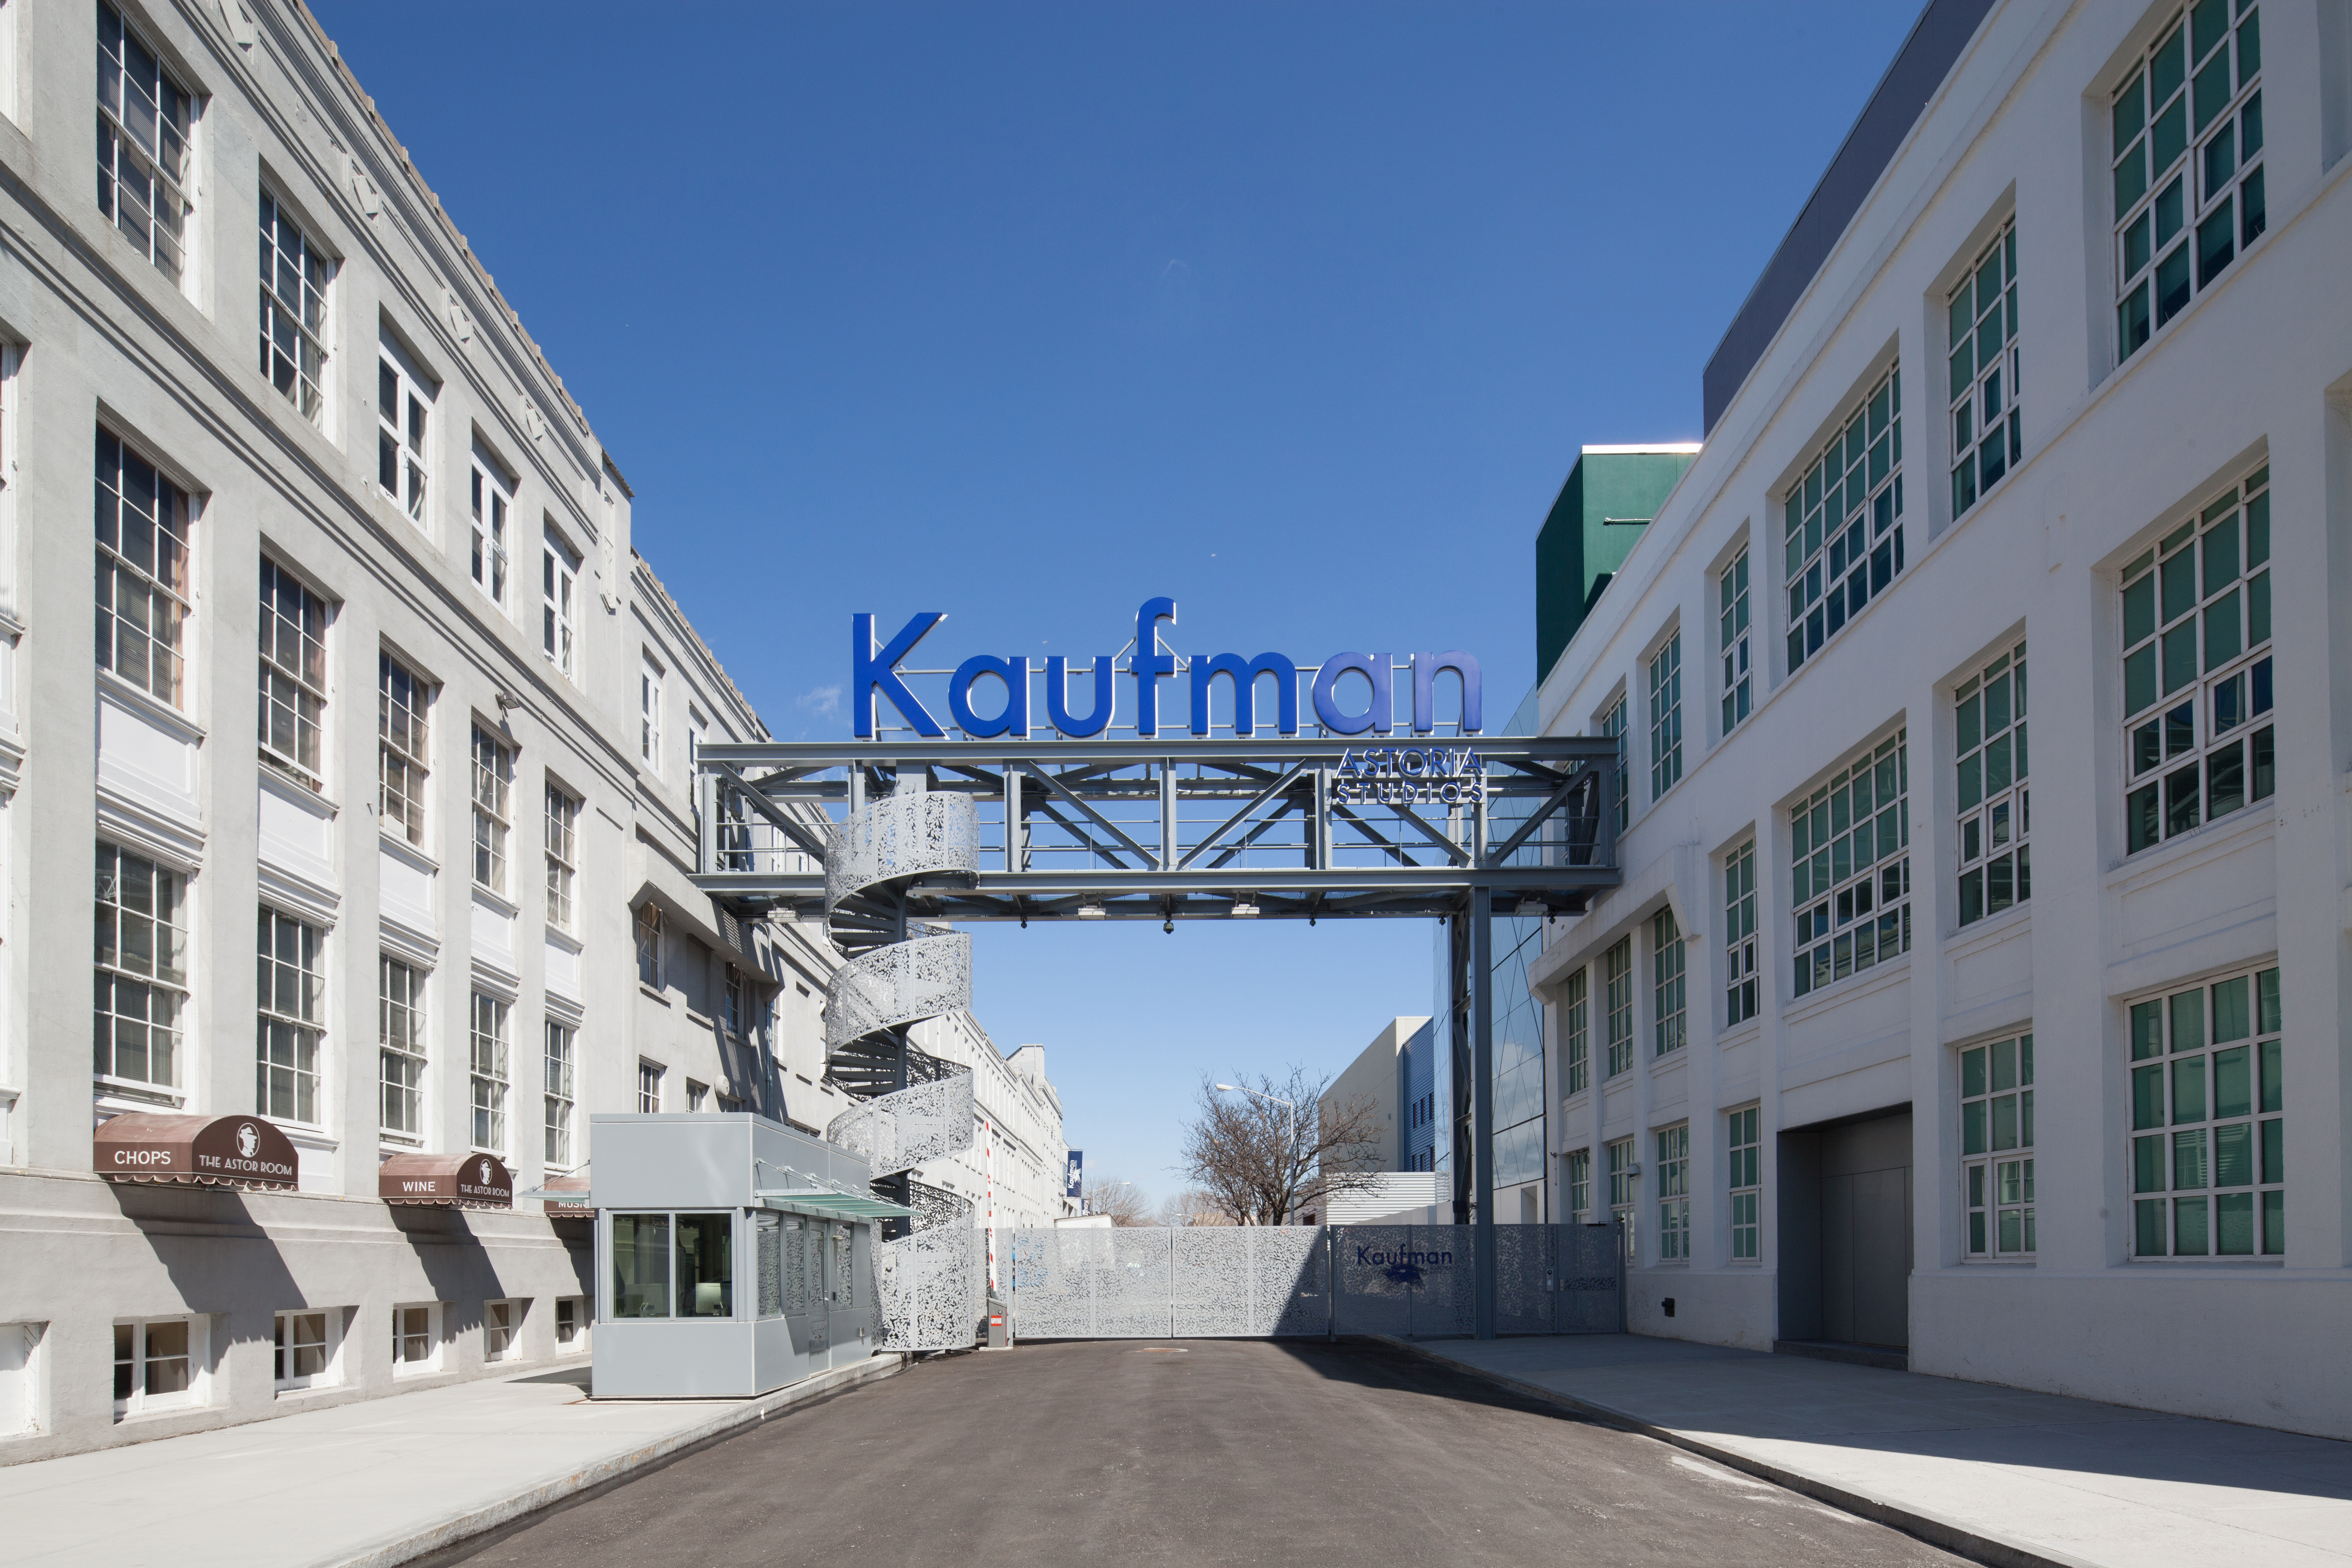 The Kaufman Astoria Studios sign from 35th Avenue.